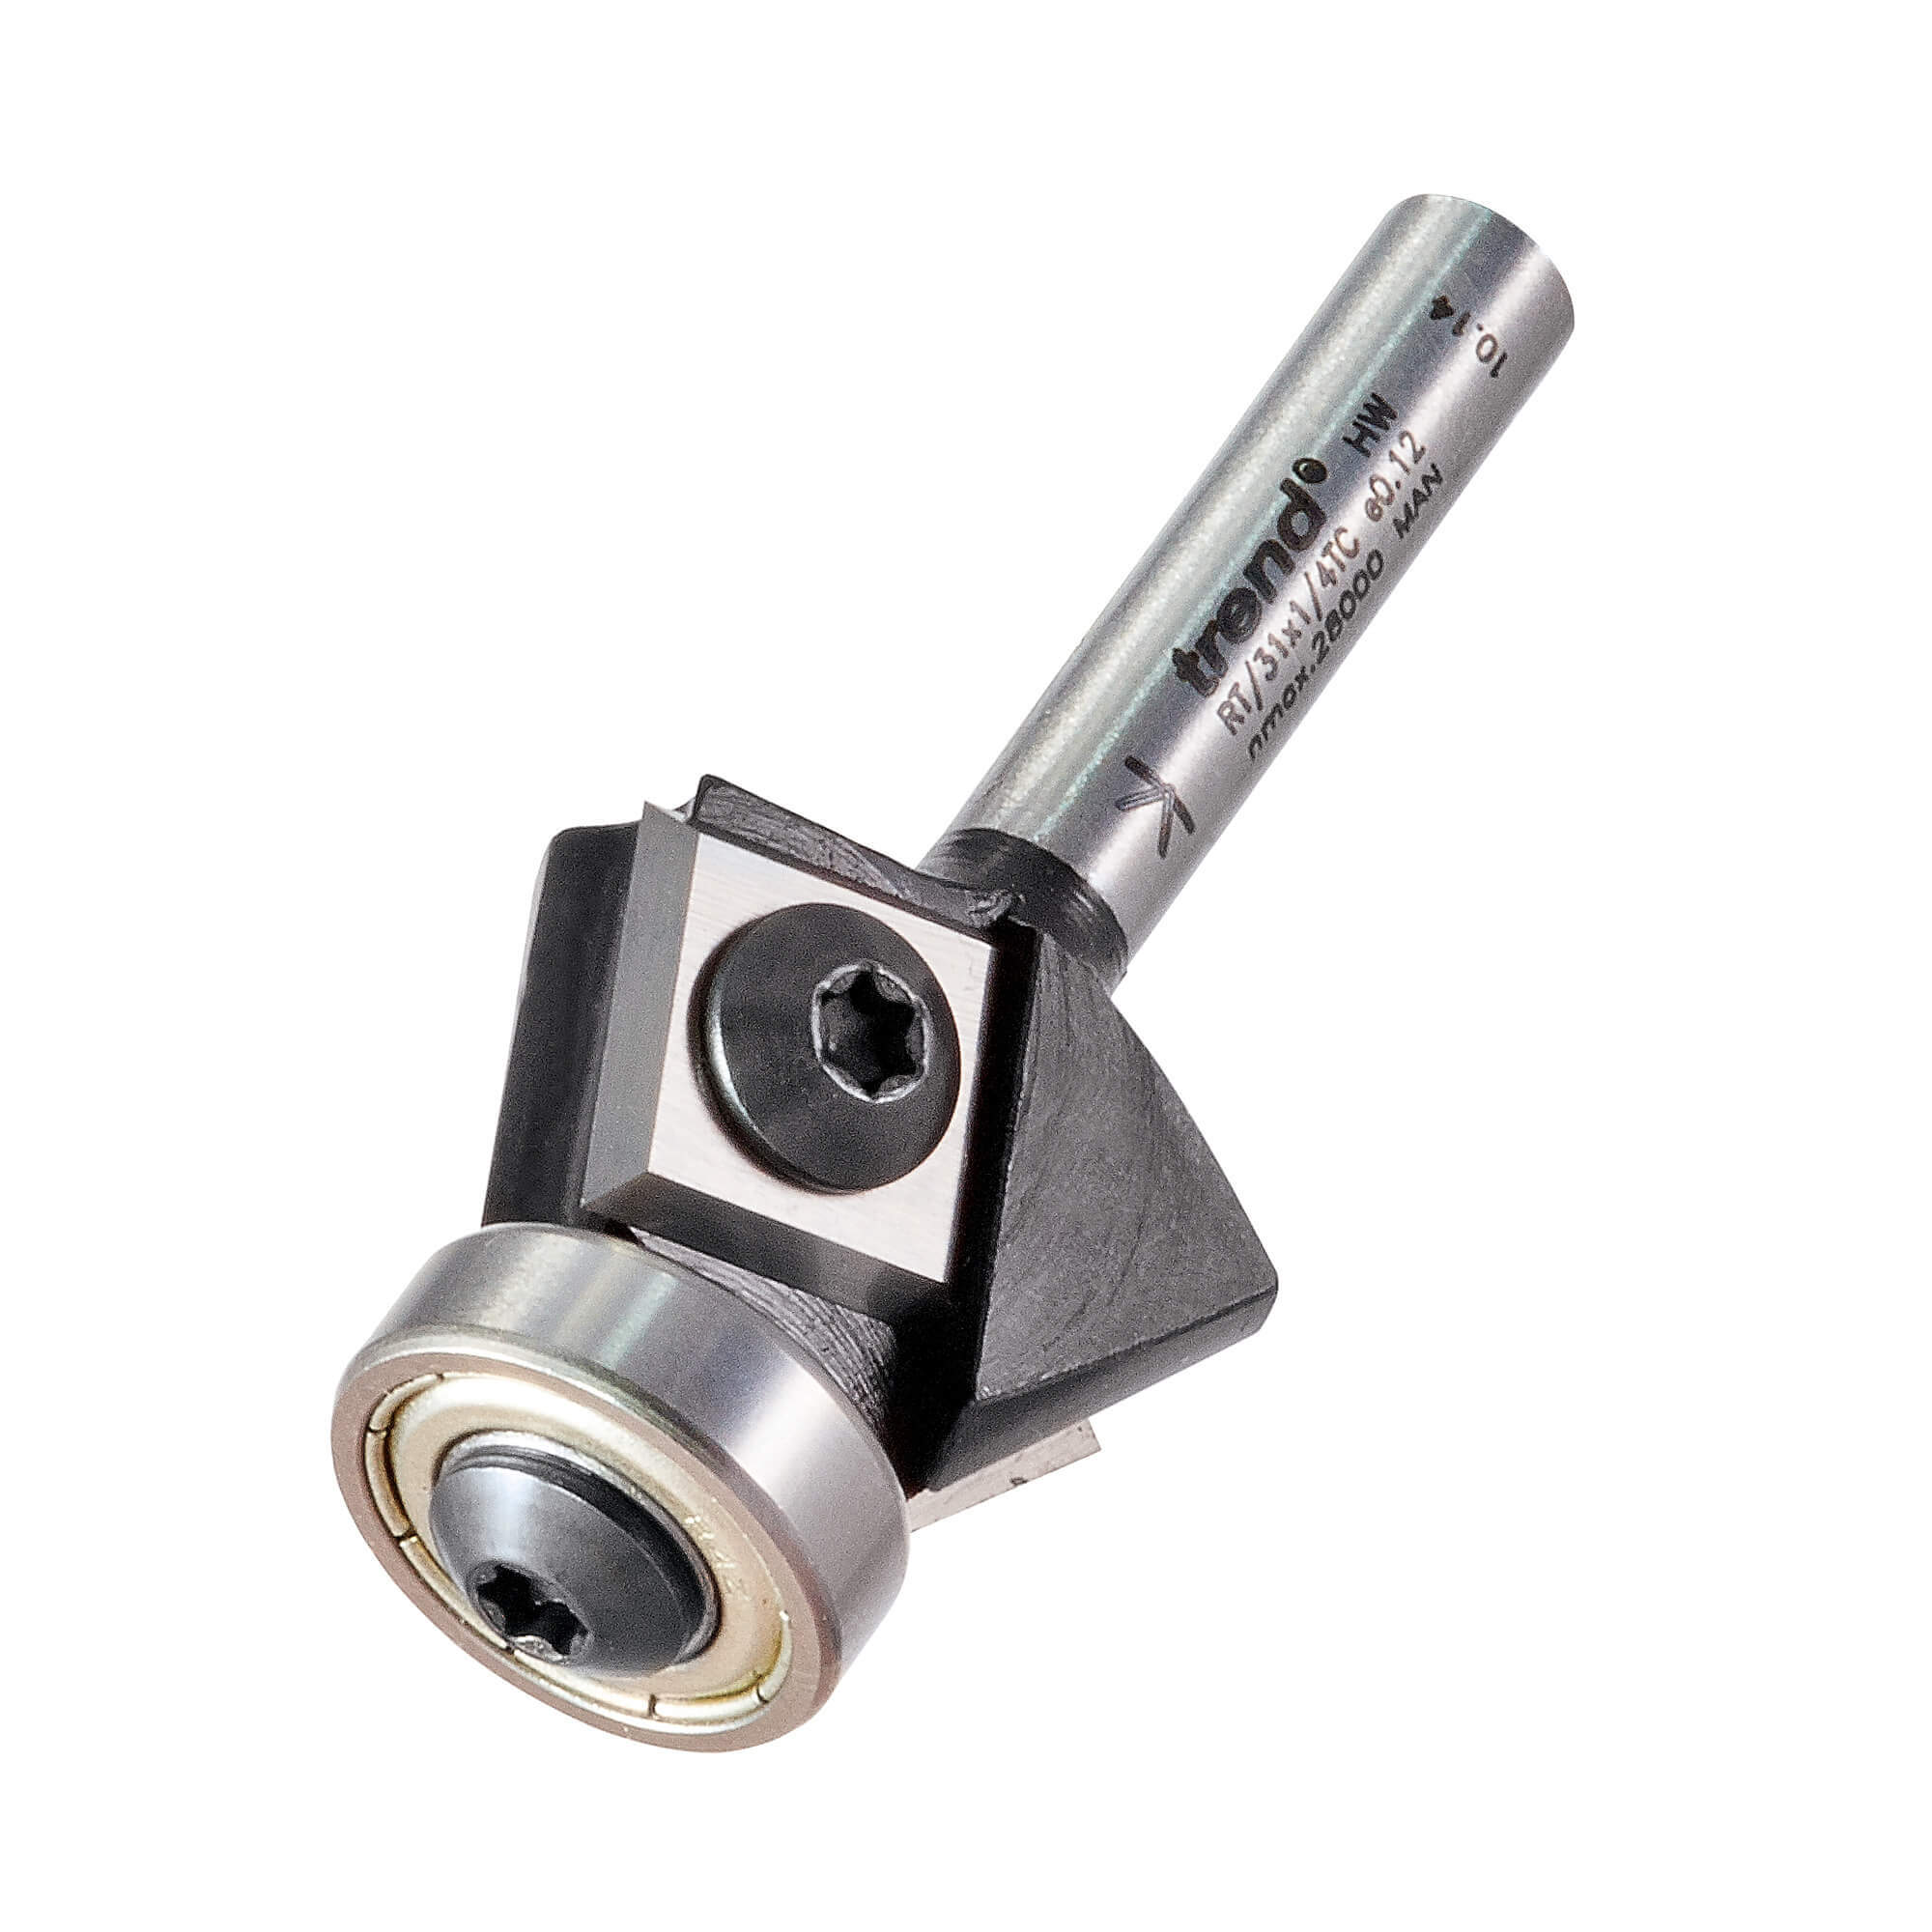 Photo of Trend Rotatip Bevel Trimmer Bearing Guided Router Cutter 24mm 12mm 1/4